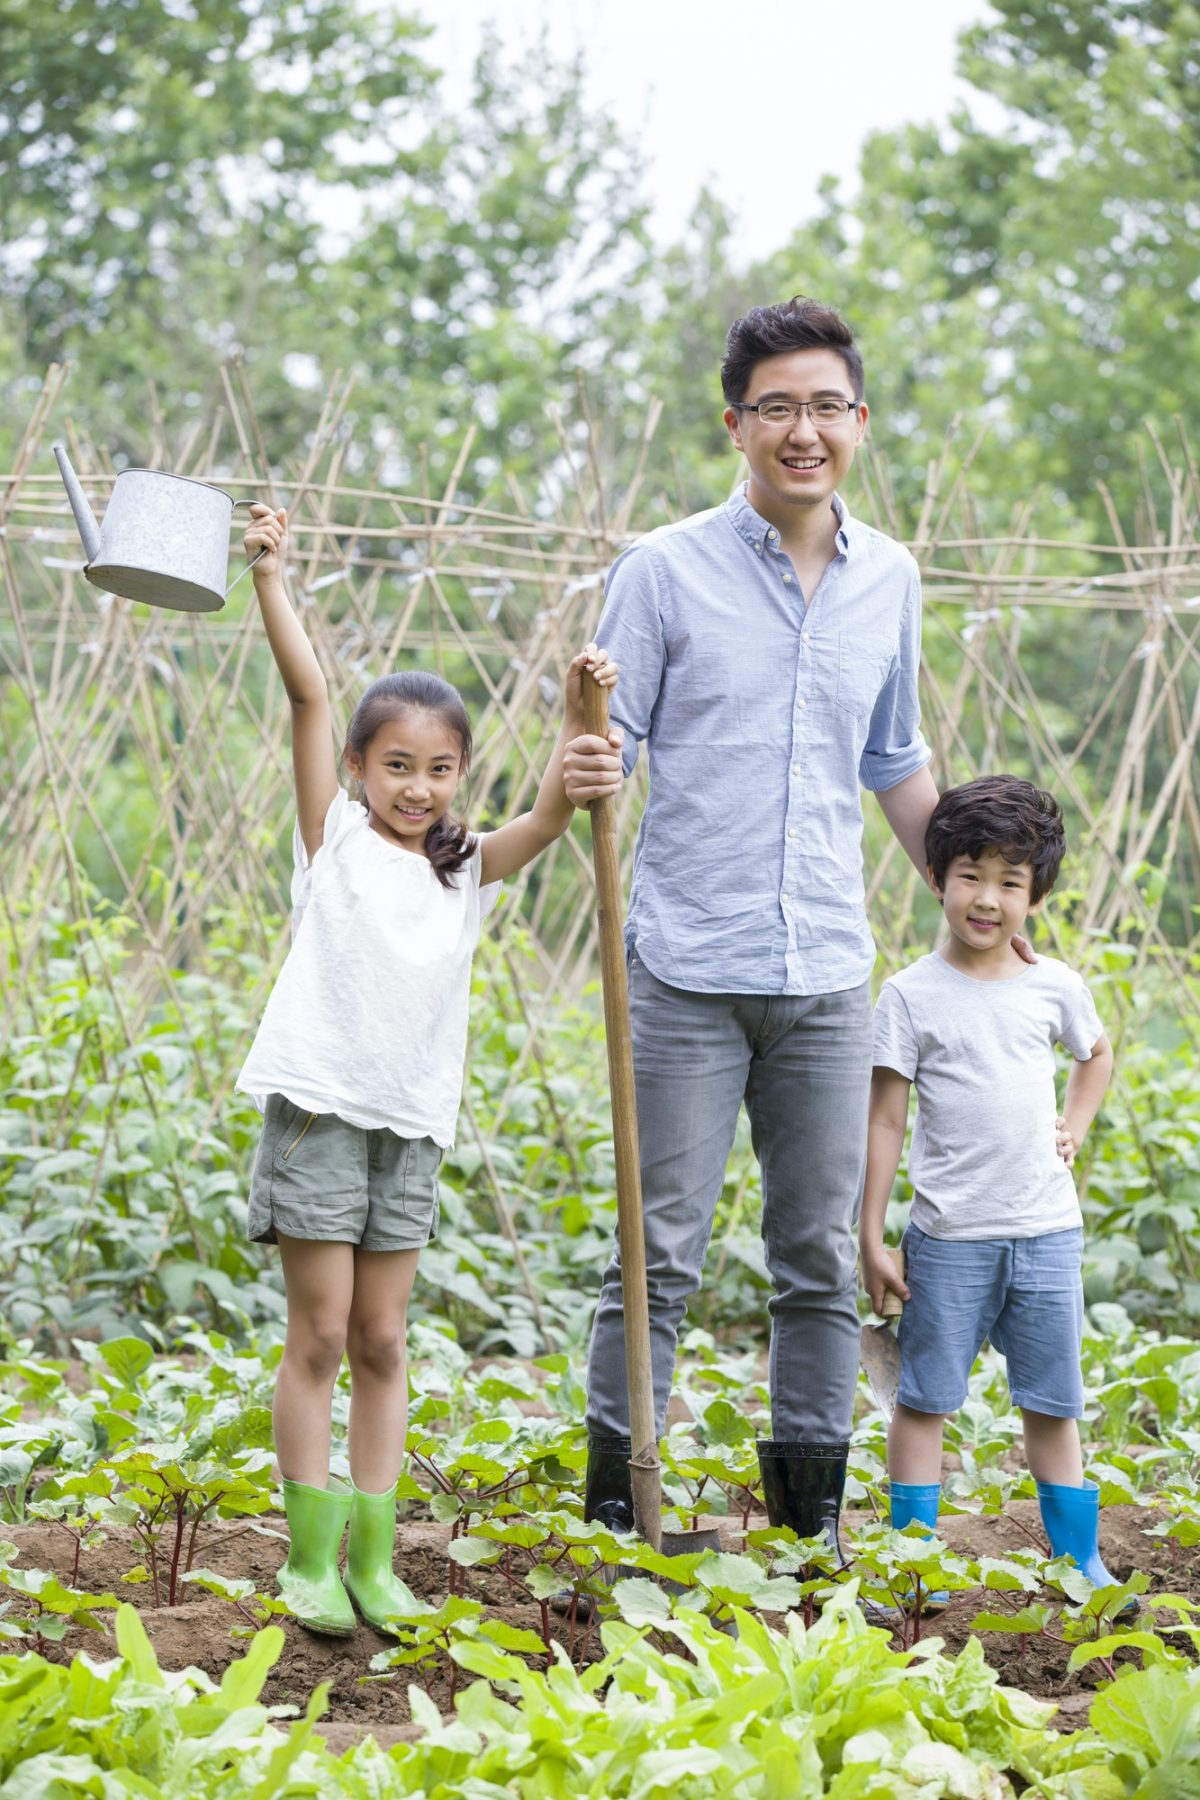 Young father and children gardening together